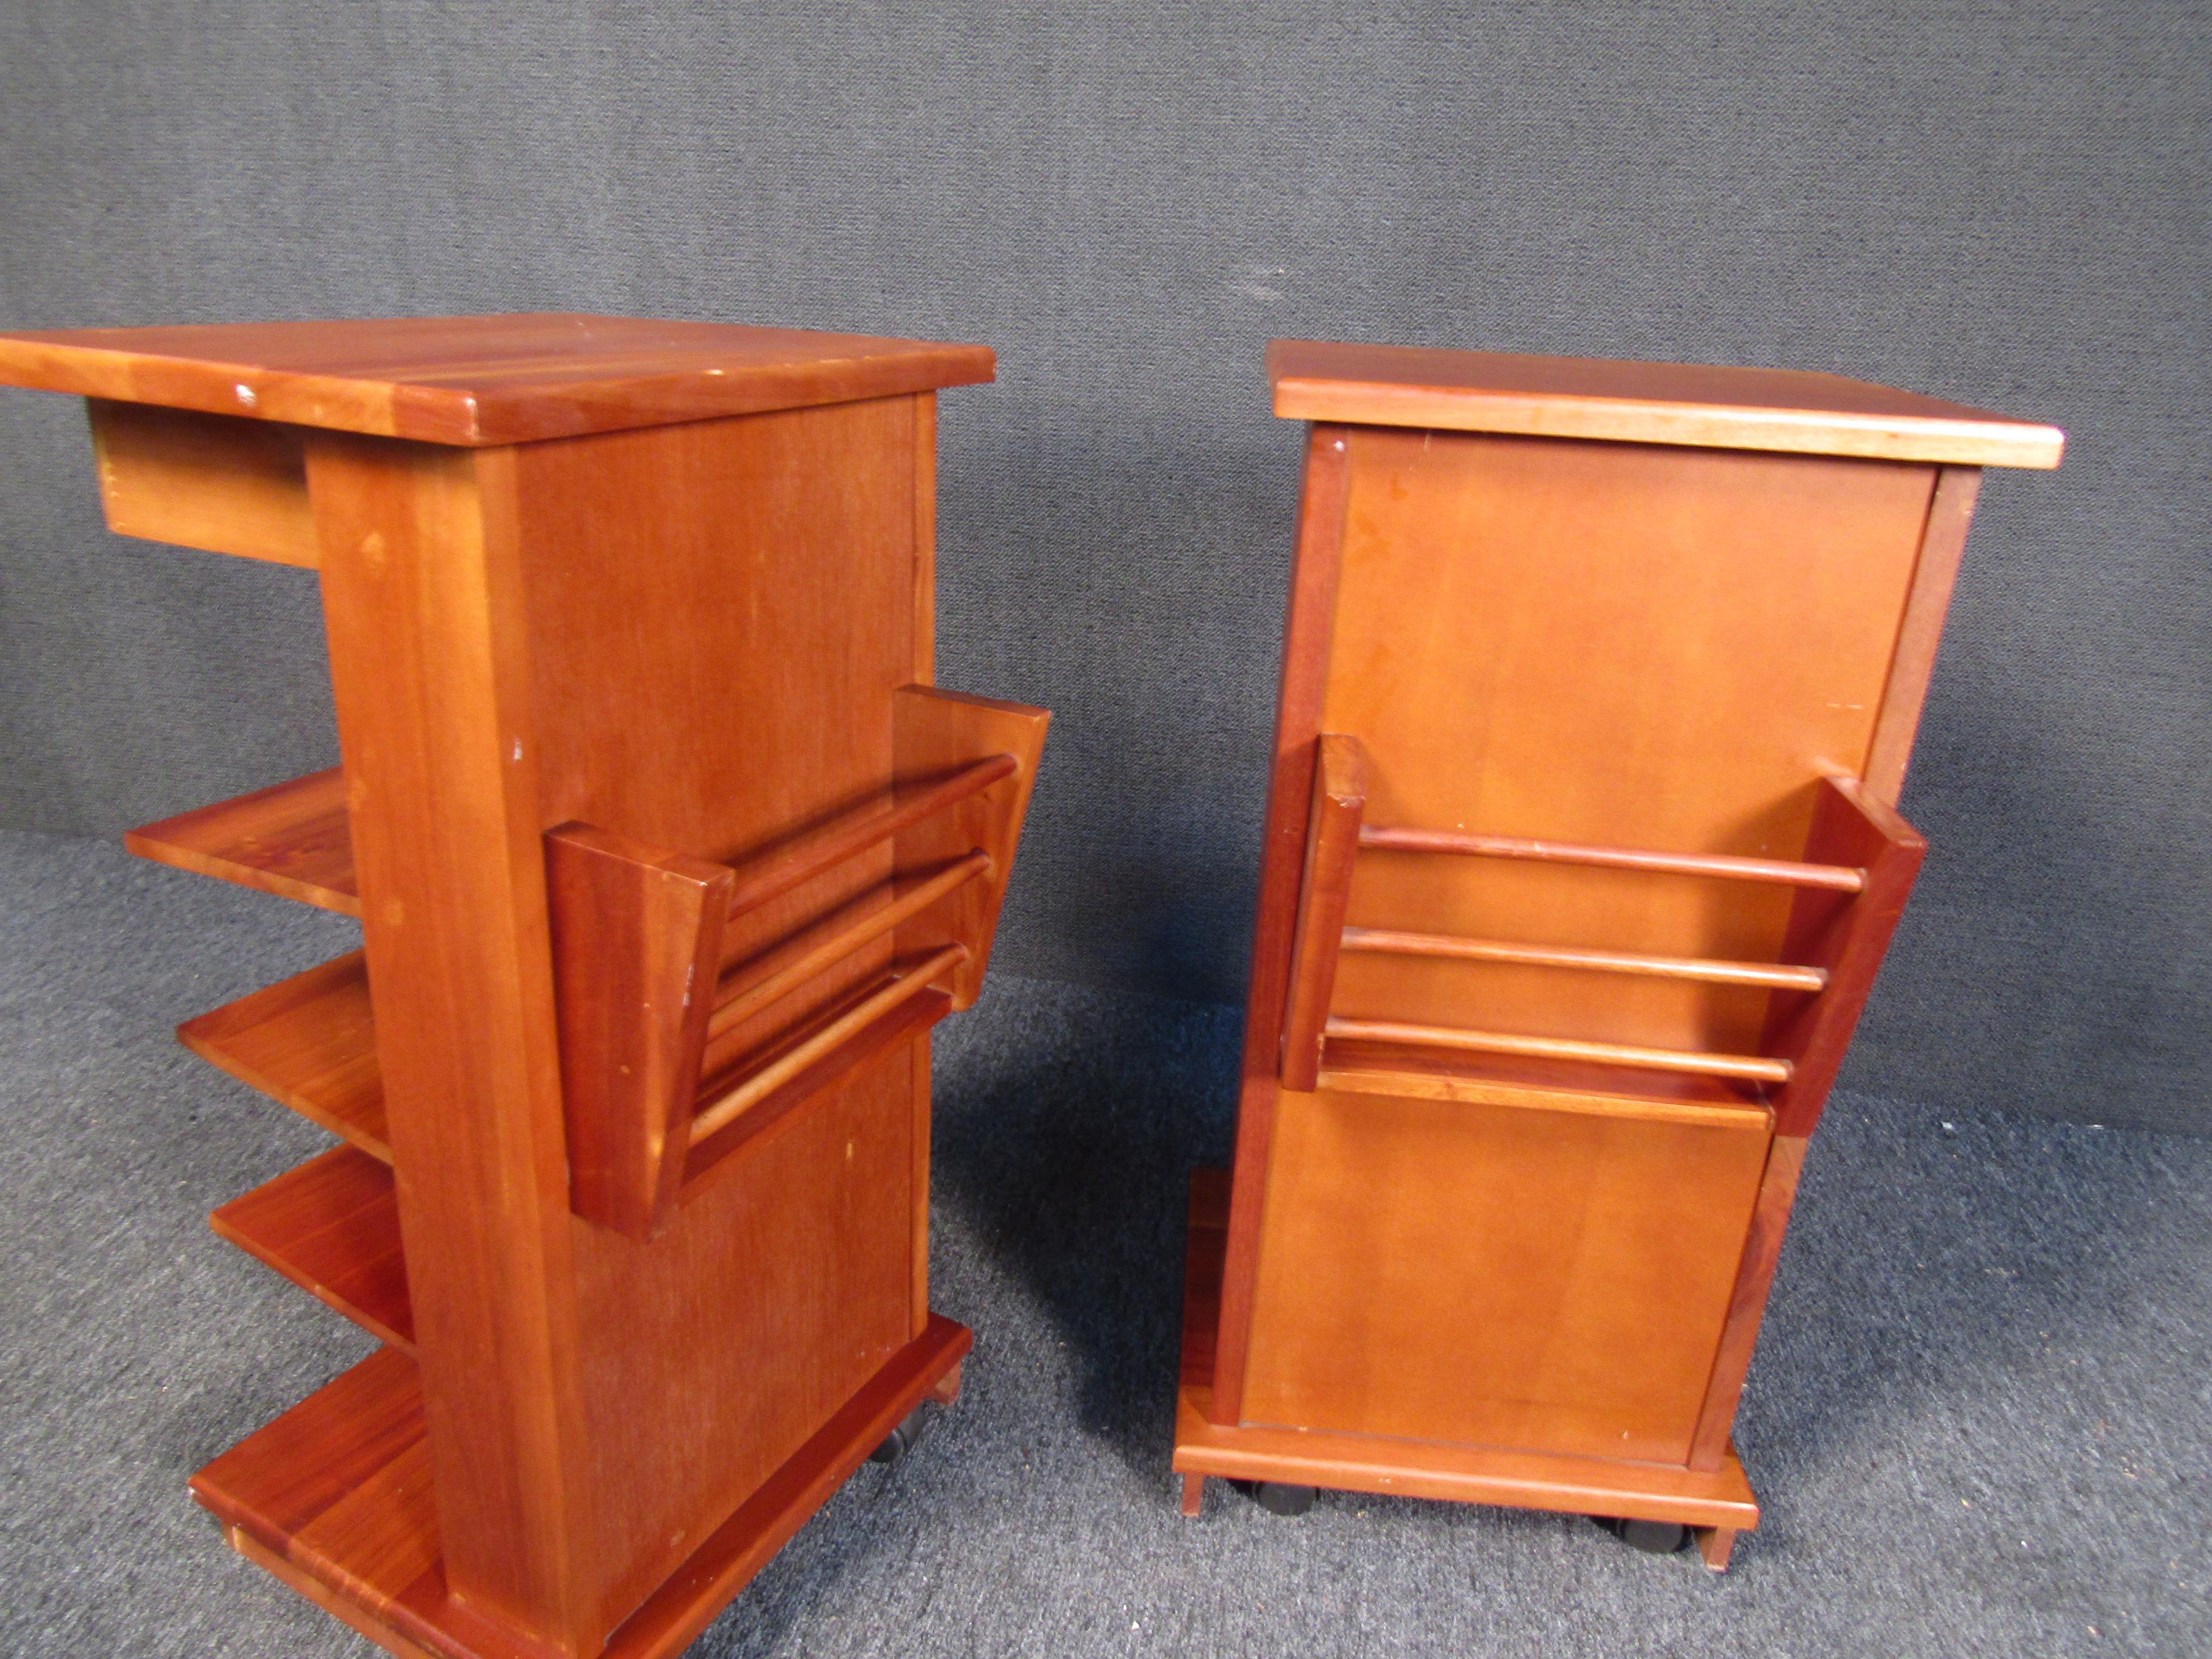 With three shelves and a top drawer, each end table in this vintage set offers storage in a timeless Mid-Century Modern design. Please confirm item location with seller (NY/NJ).